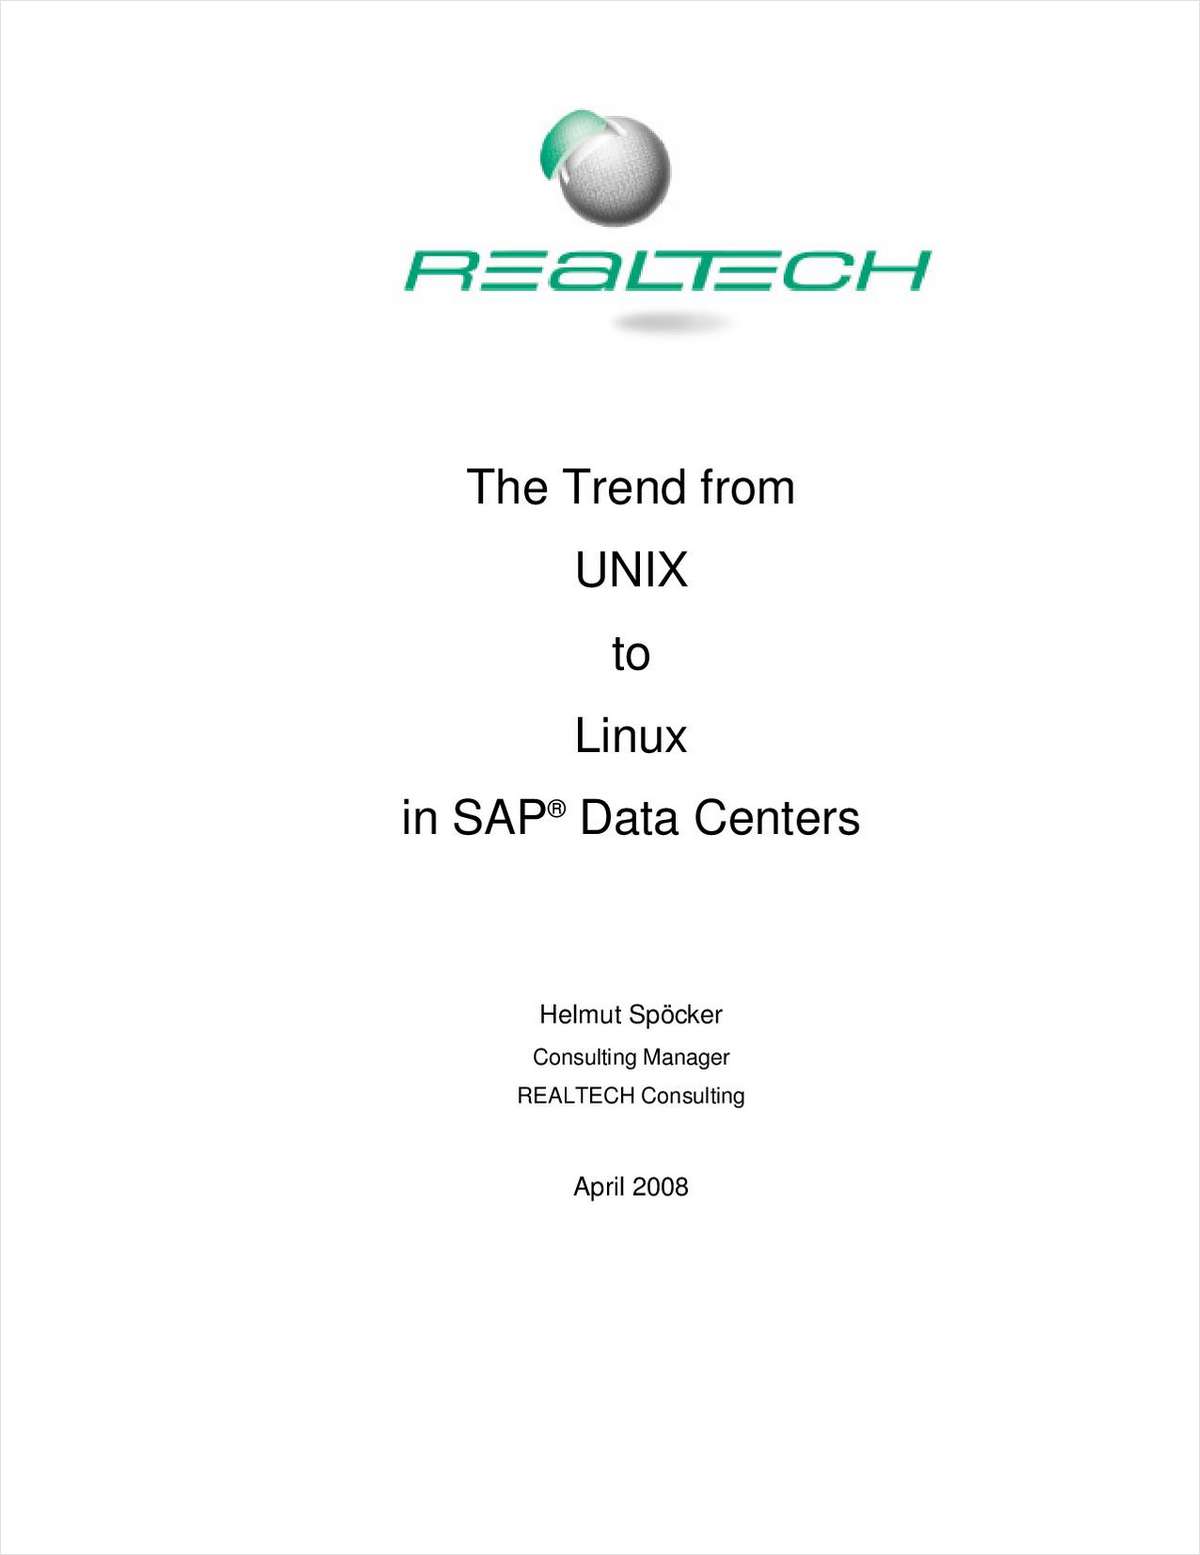 The Trend from UNIX to Linux in SAP® Data Centers